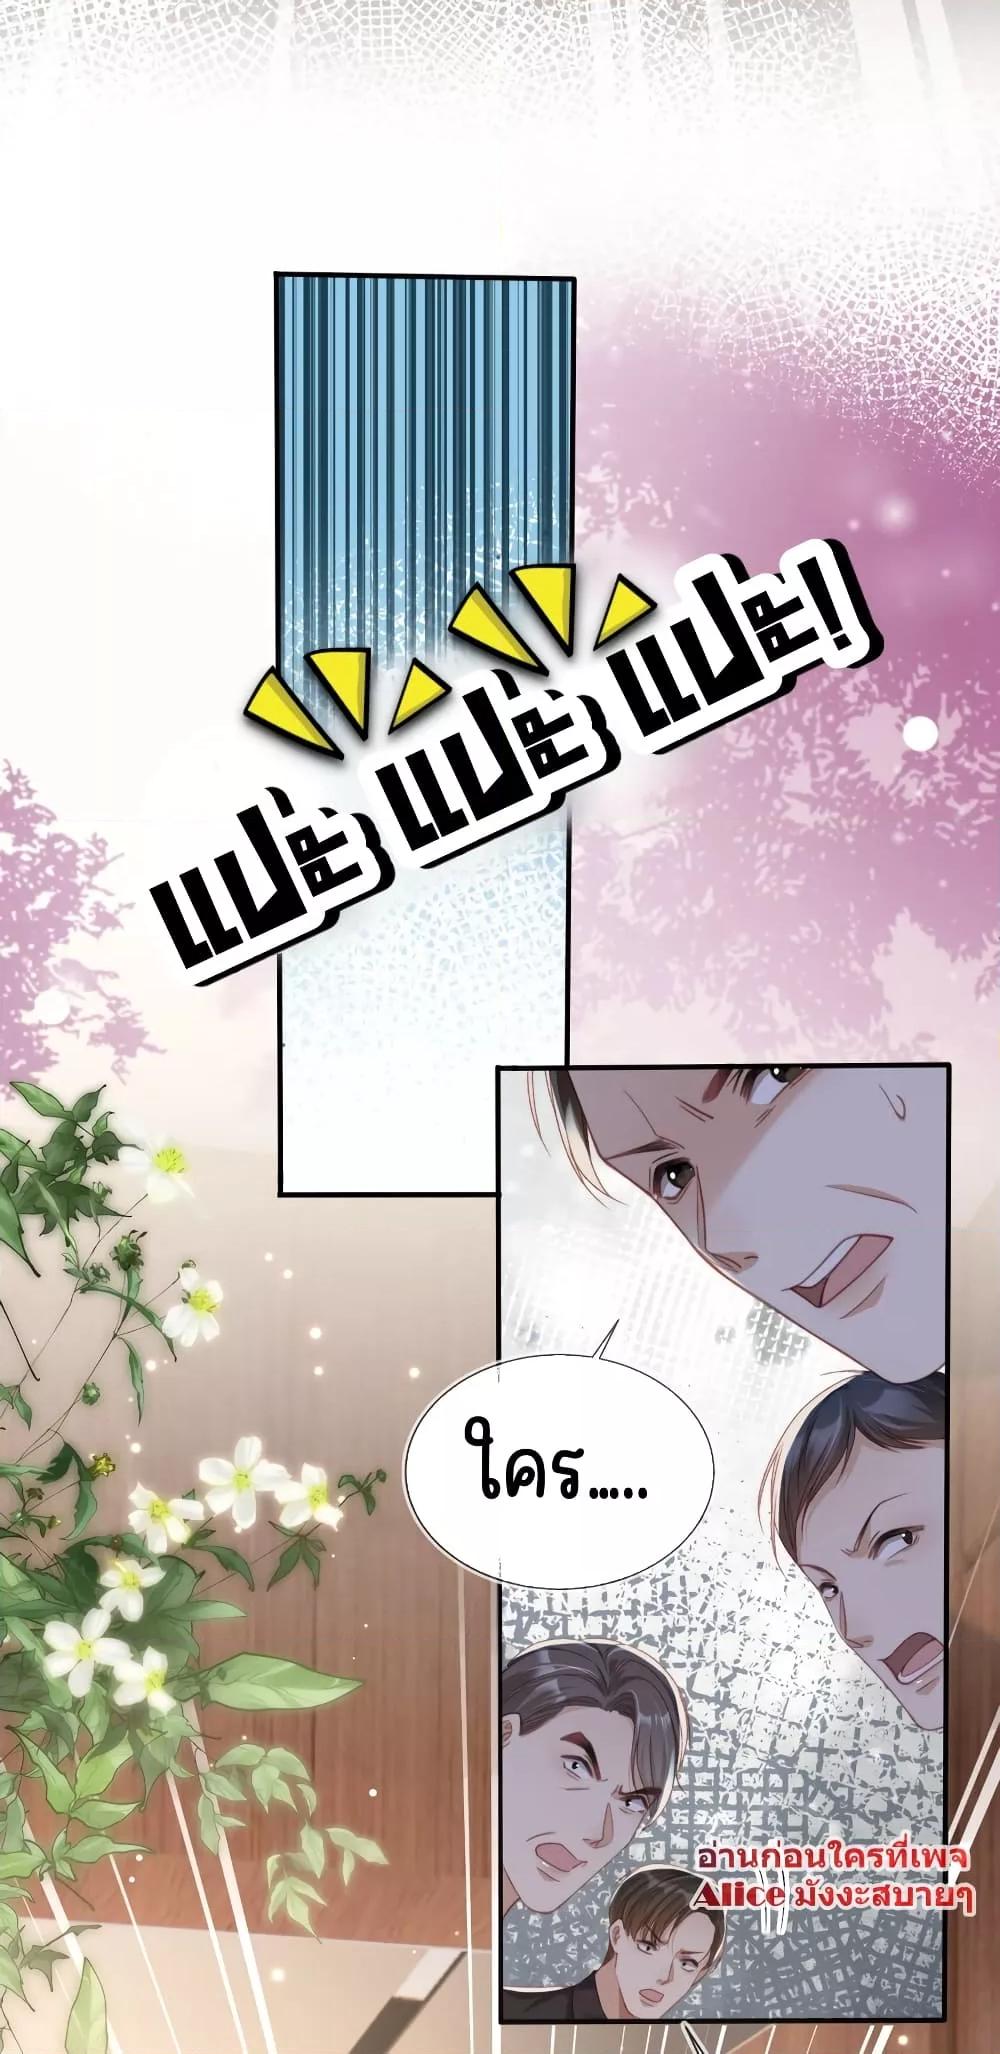 After Rebirth, I Married a ตอนที่ 25 (26)